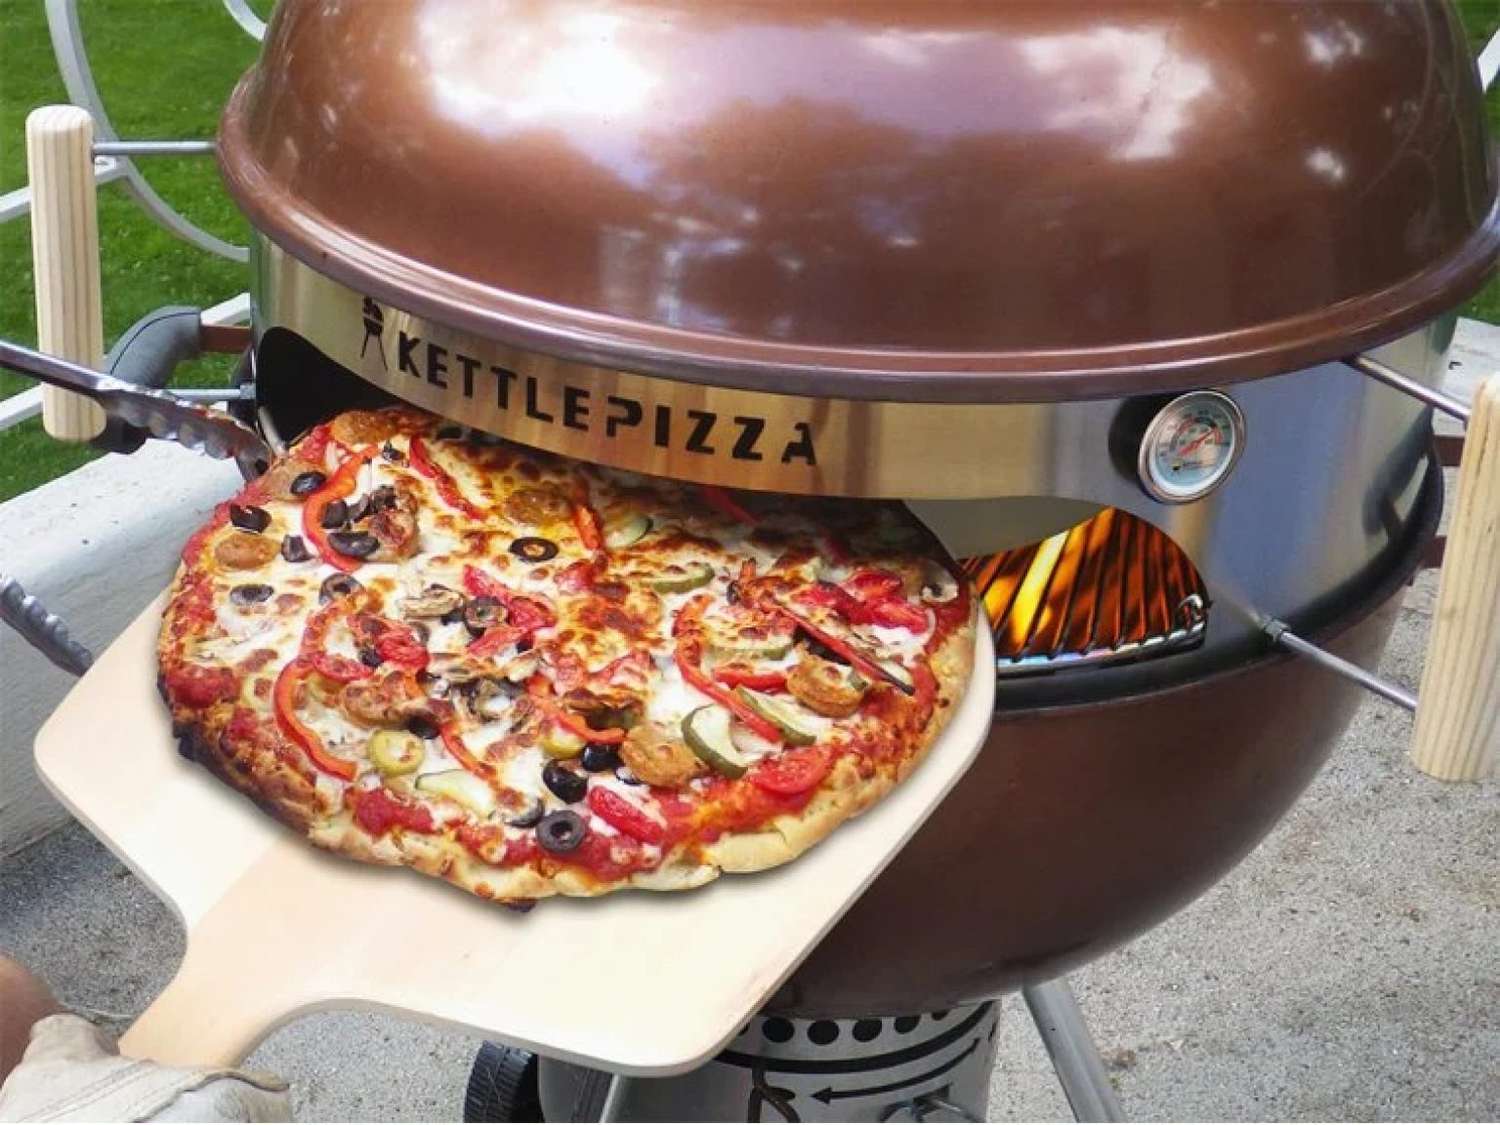 KettlePizza: Elevating Homemade Pizza to Pizzeria Perfection